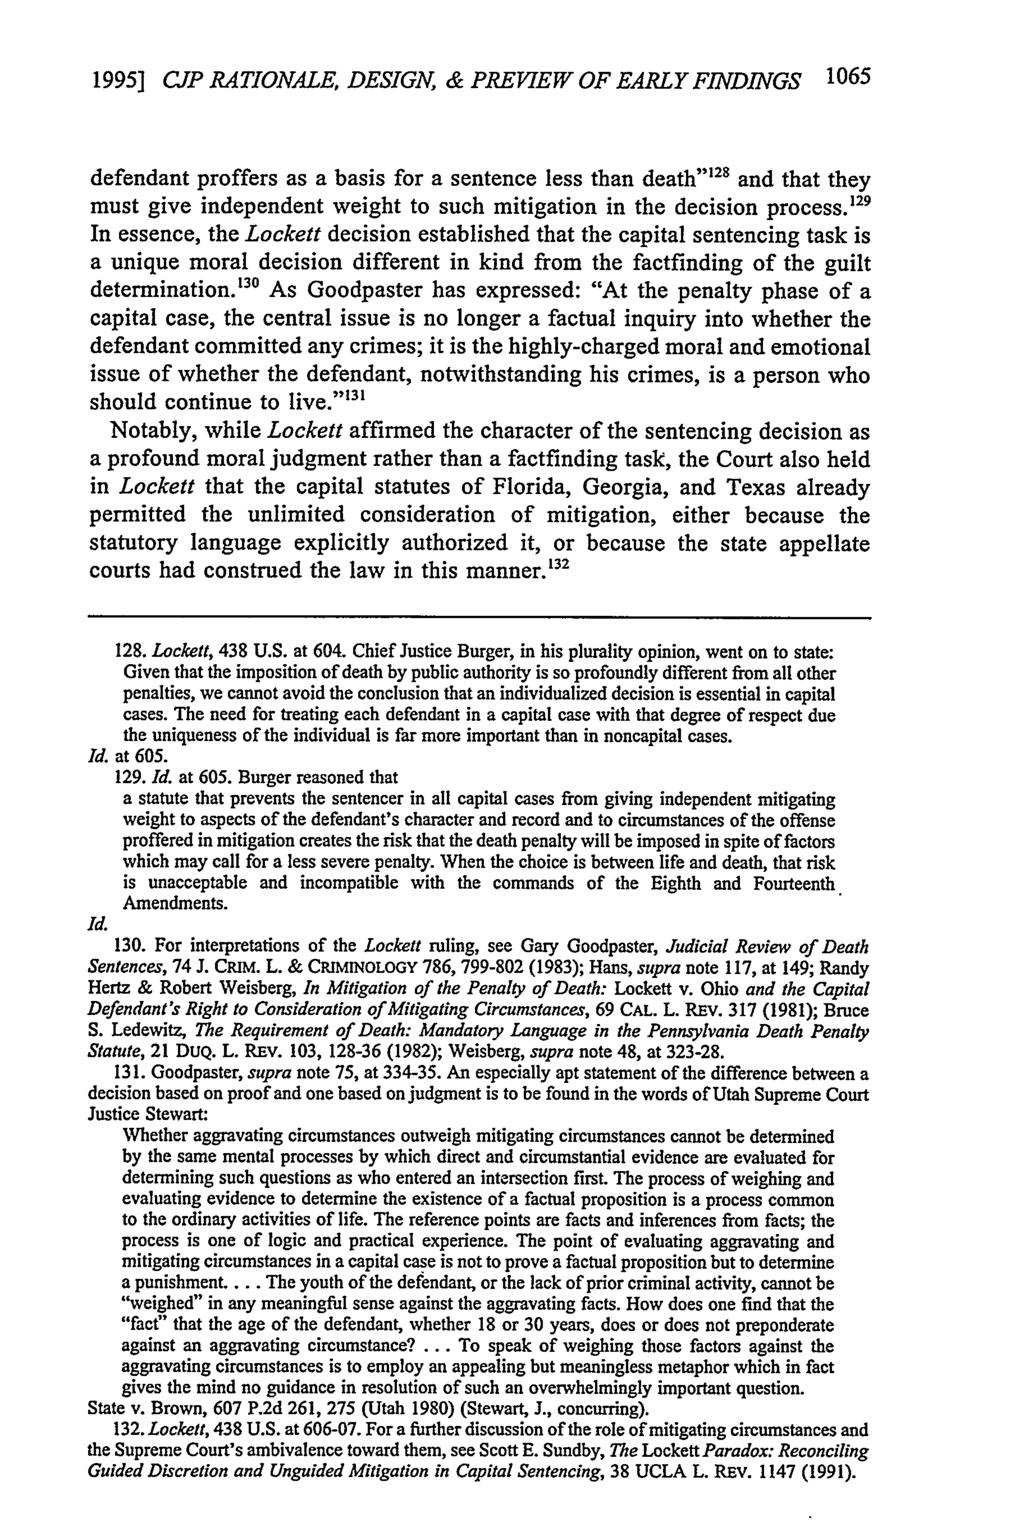 1995] CP RATIONALE, DESIGN, & PREVIEW OF EARLY FINDINGS 1065 defendant proffers as a basis for a sentence less than death"' 28 and that they must give independent weight to such mitigation in the